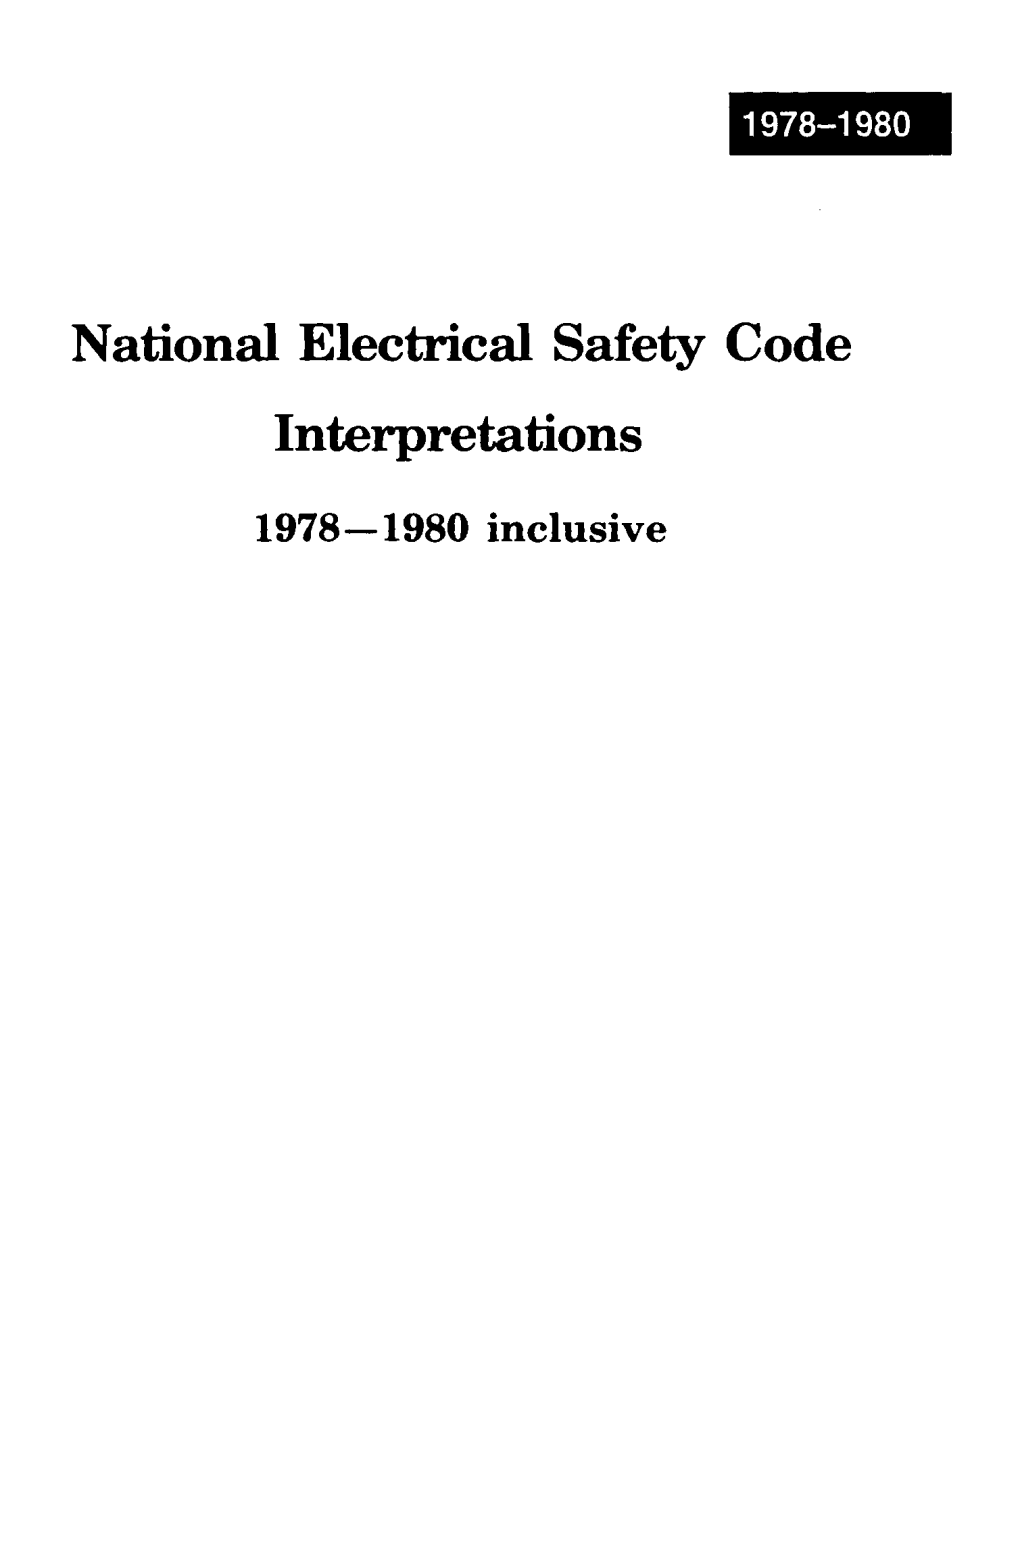 National Electrical Safety Code Interpretations